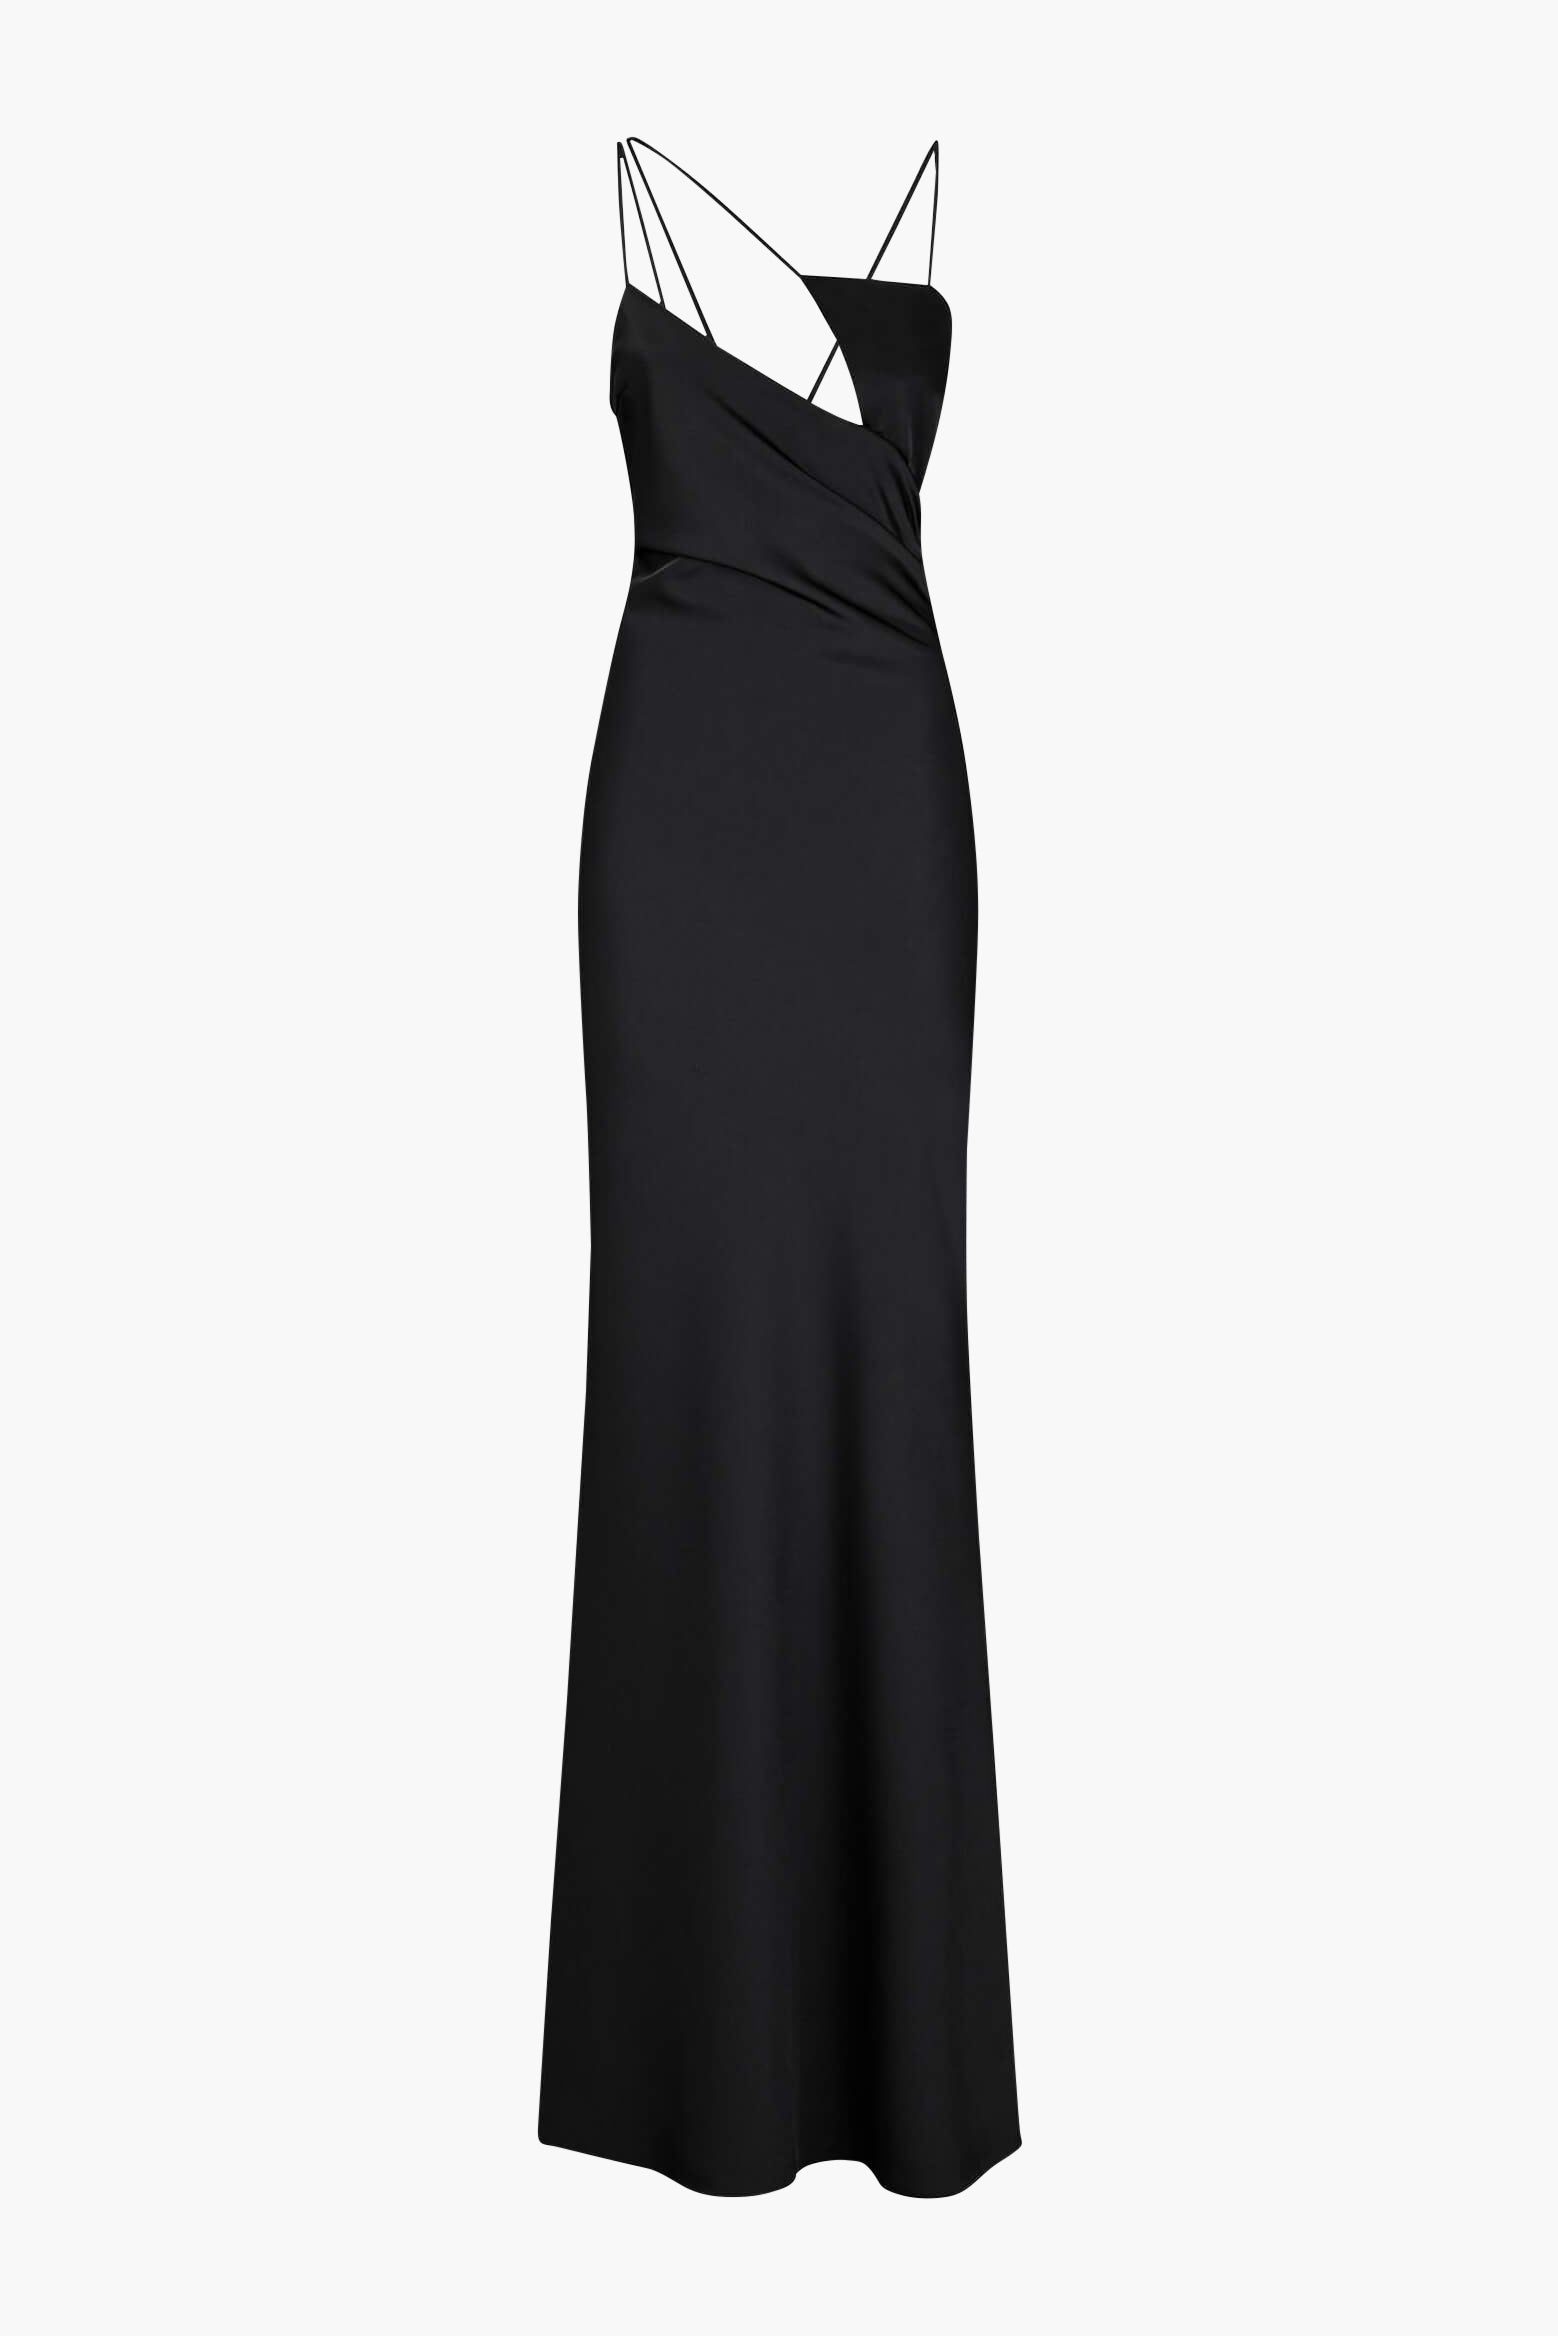 The Attico Melva Long Dress from The New Trend